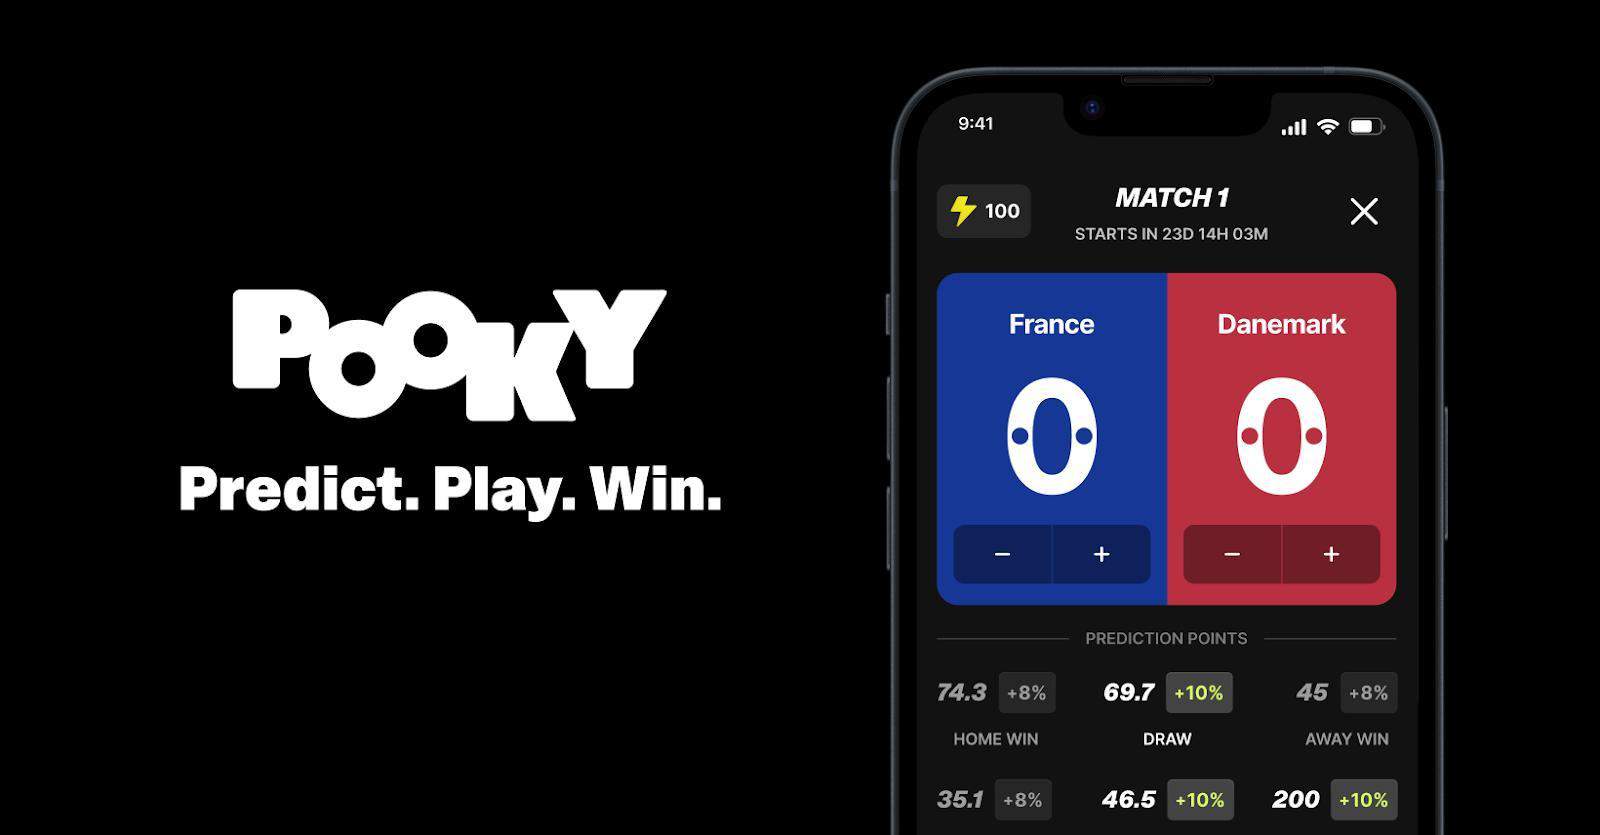 Predict-and-earn-app-pooky-launching-free-public-beta-ahead-of-fifa-world-cup-qatar